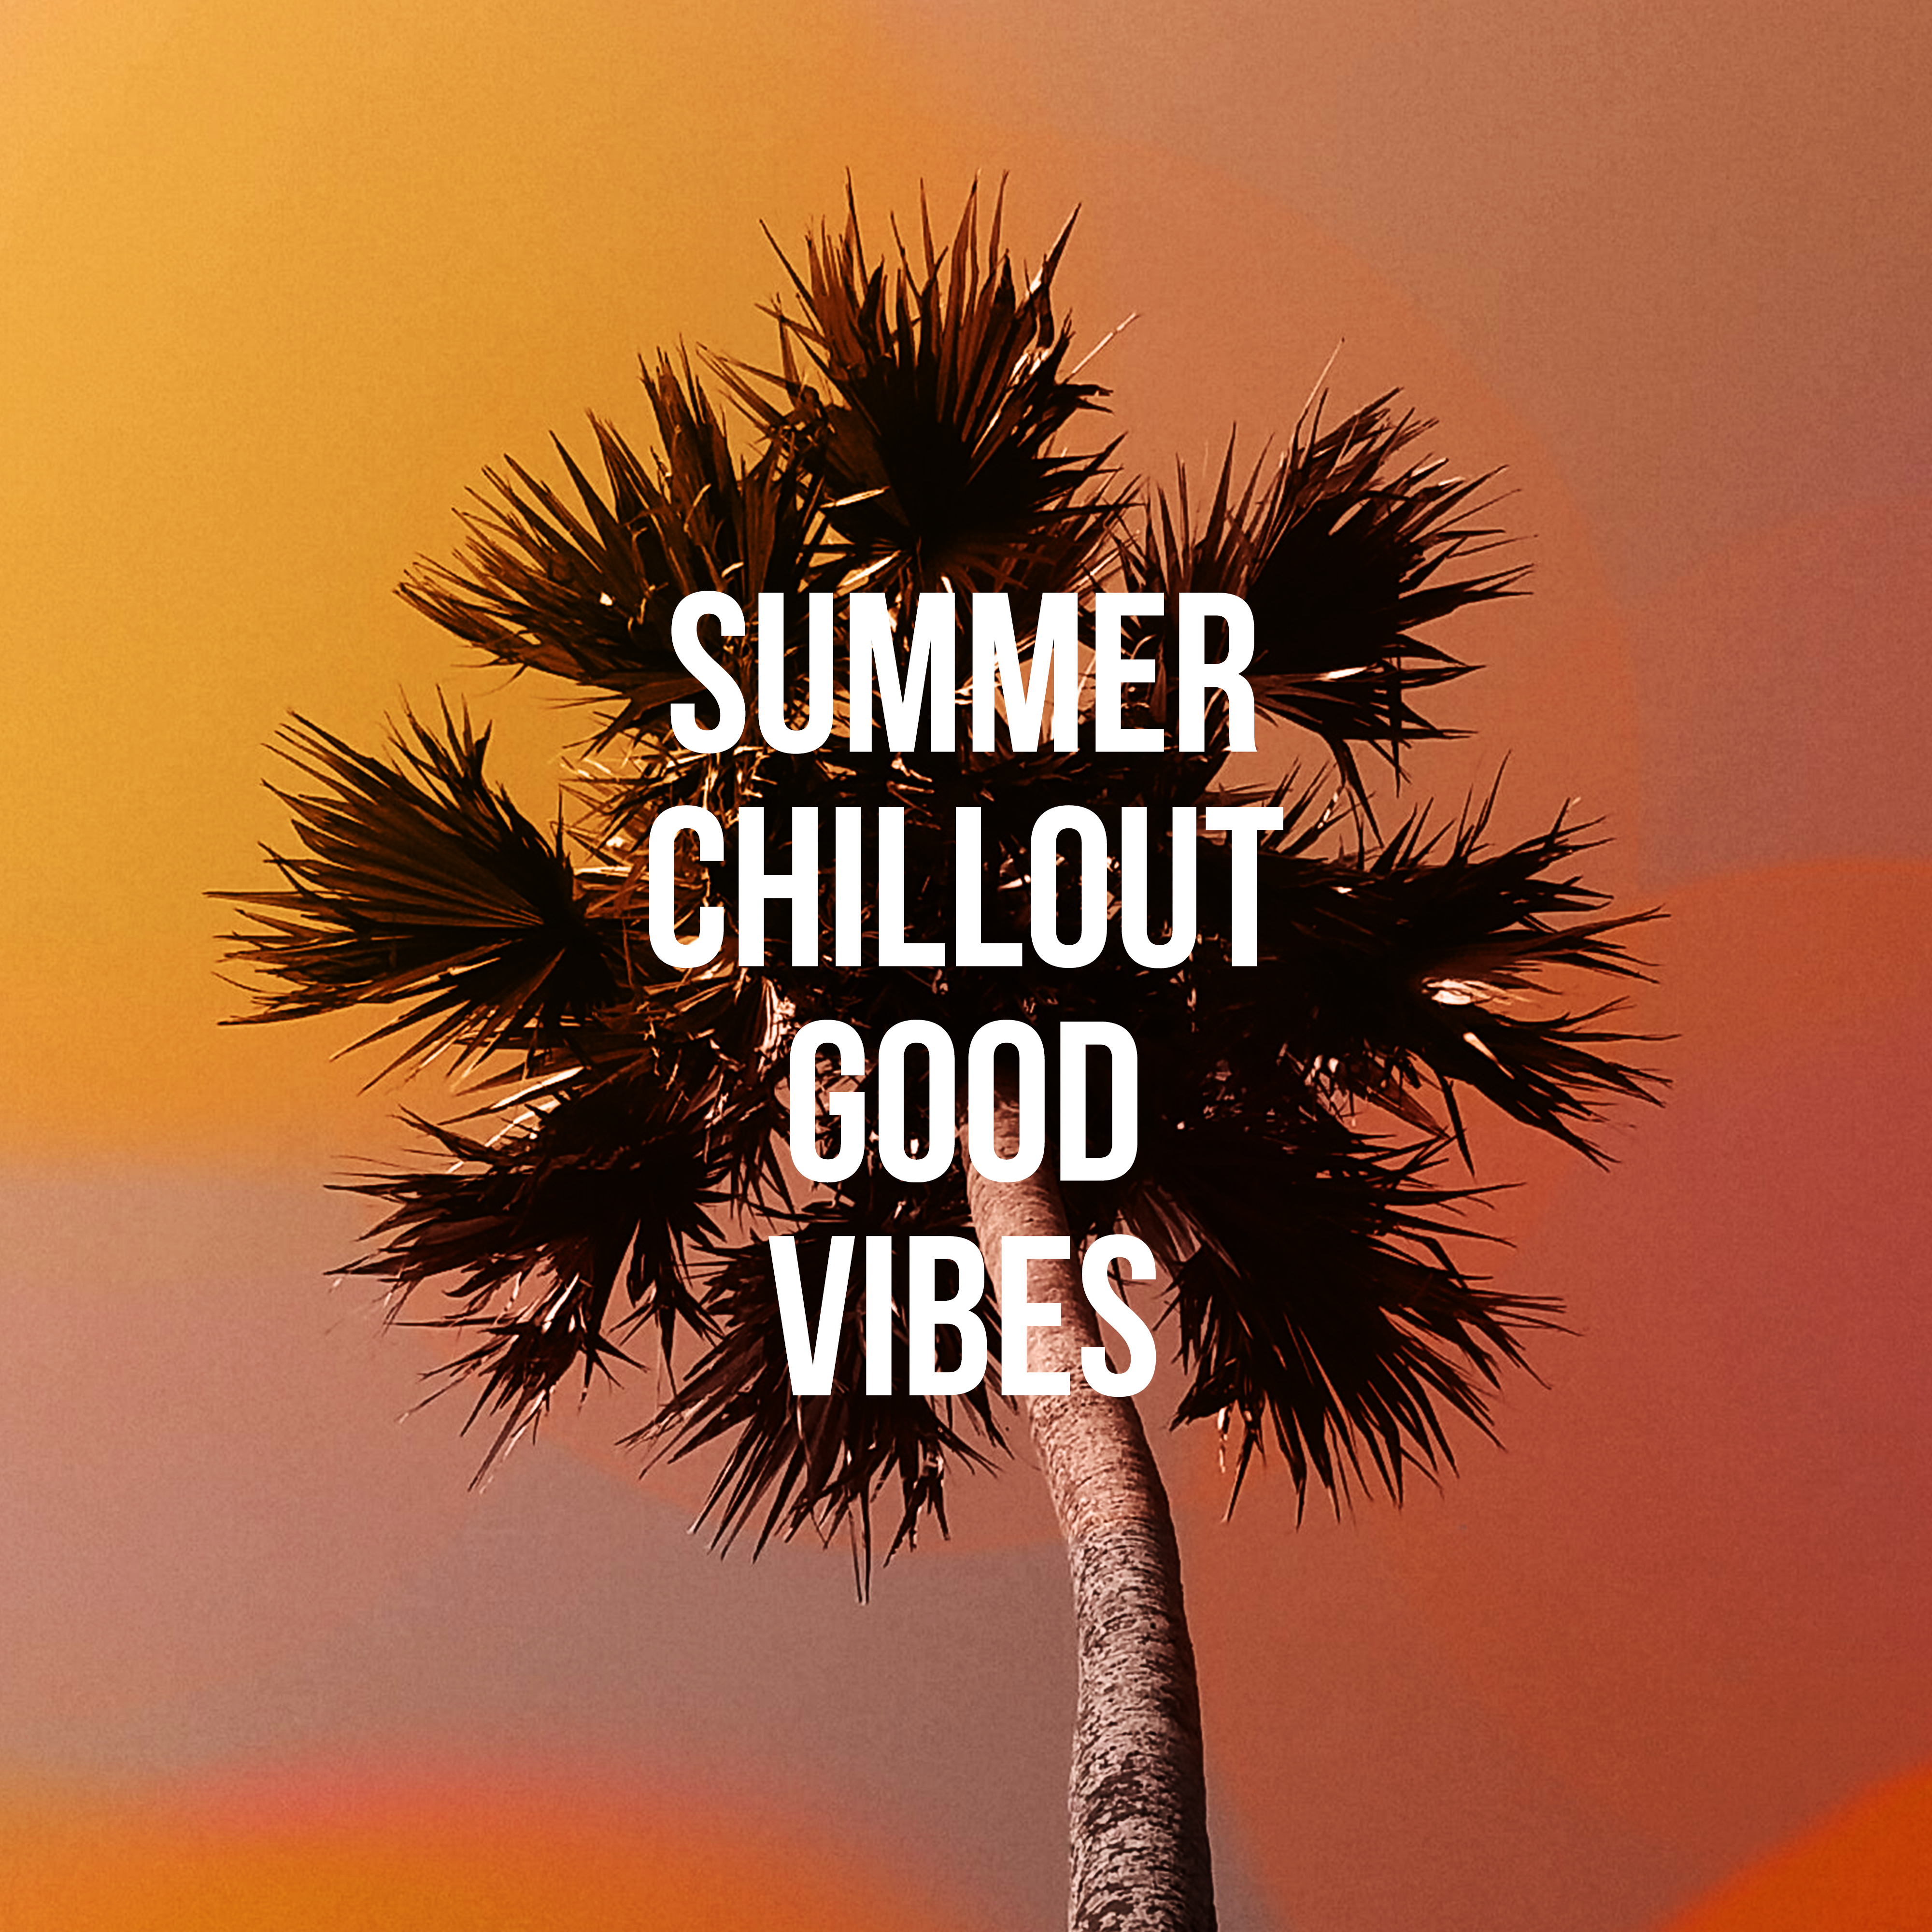 Summer Chillout Good Vibes